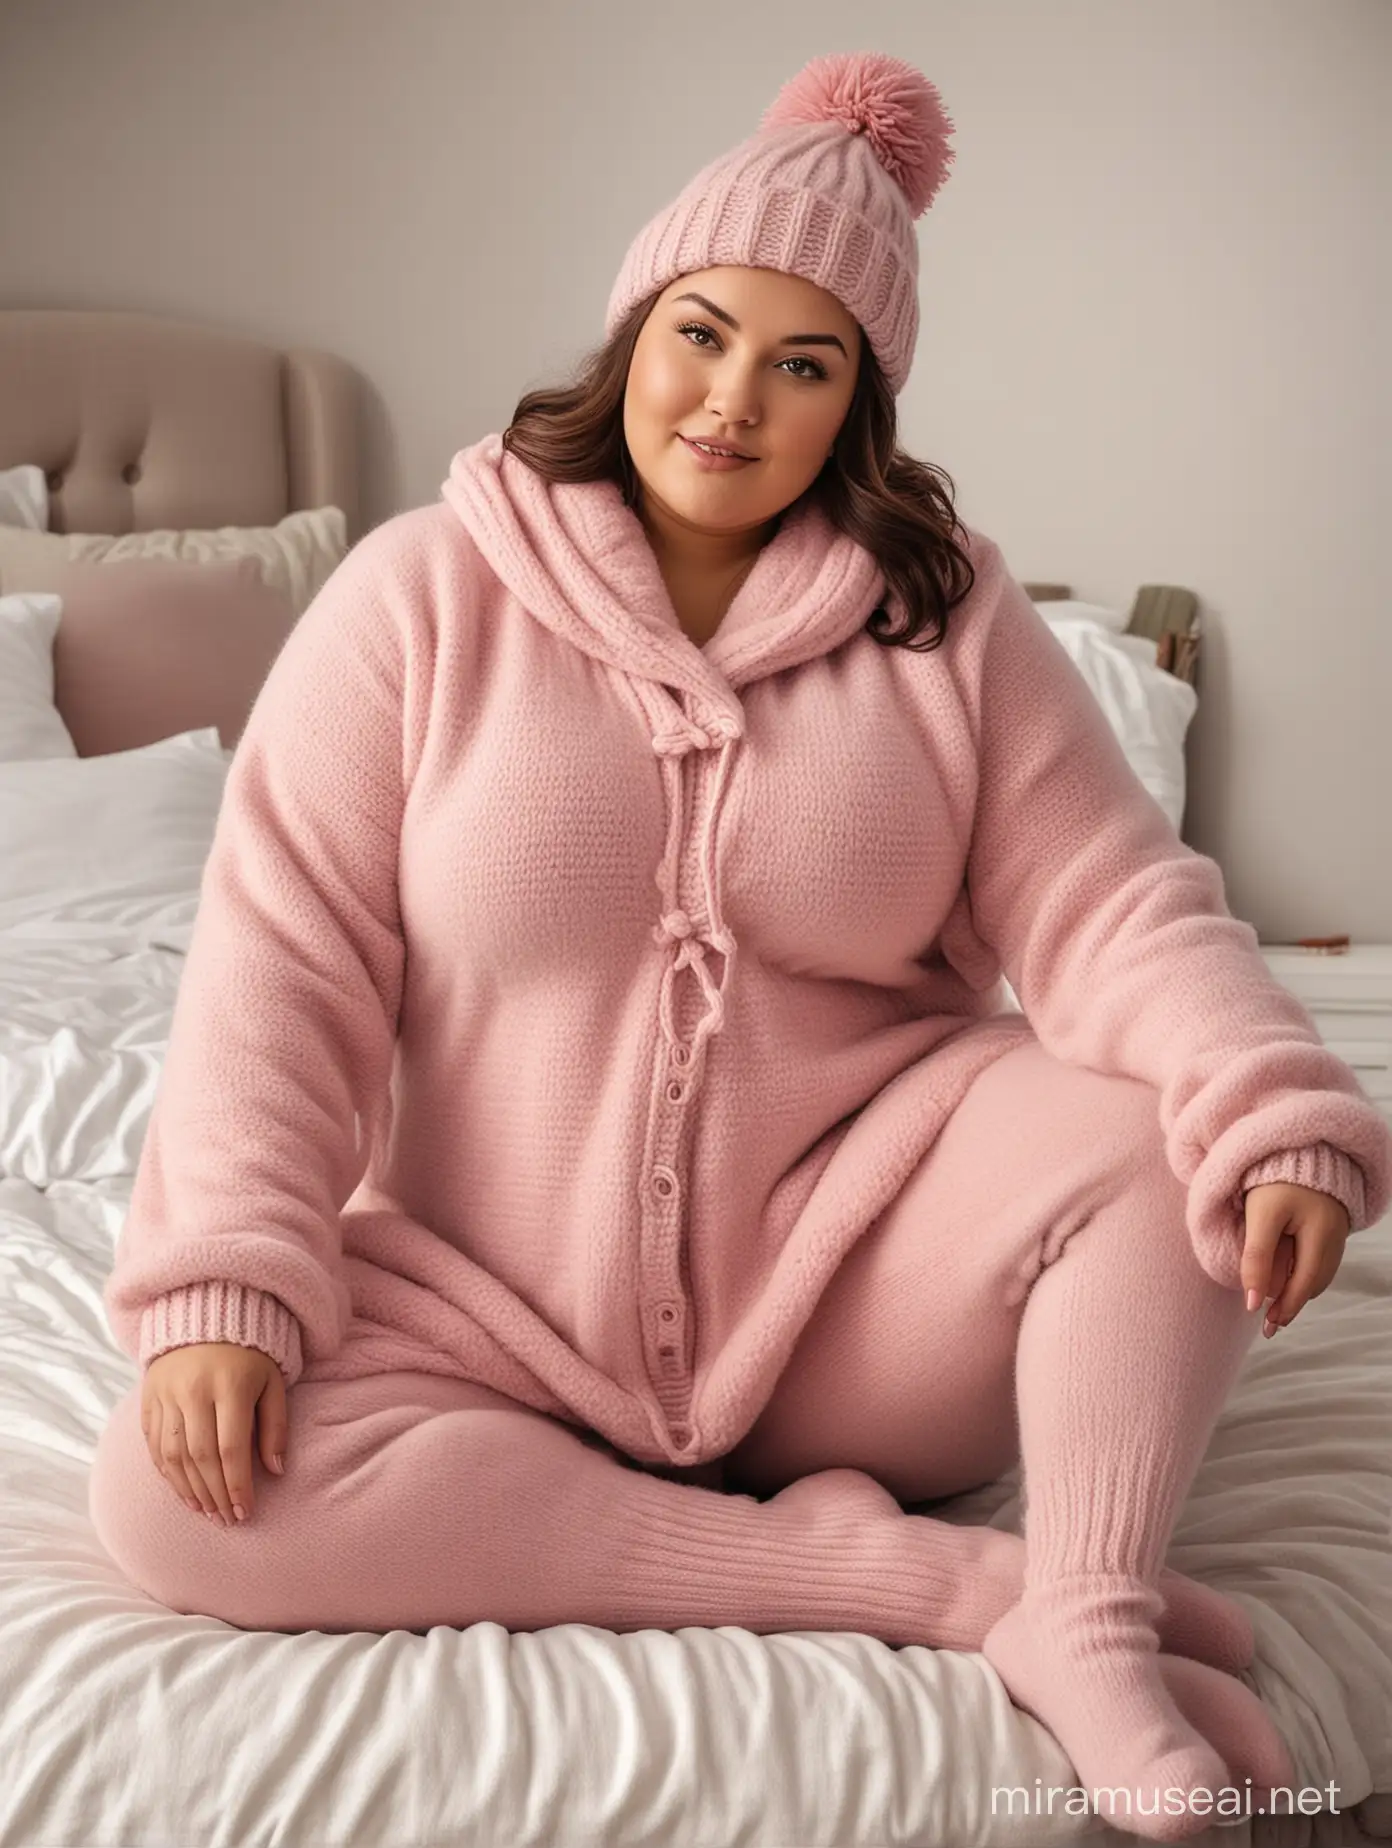 curvy, plus-size woman with huge fat boobs, sitting on a bed in a bedroom, wearing multiple layers of thick warm knitted fuzzy mohair wool clothing [onesie, pants, sweater, dress, skirt, stockings, socks, scarf, mittens, bobble hat]